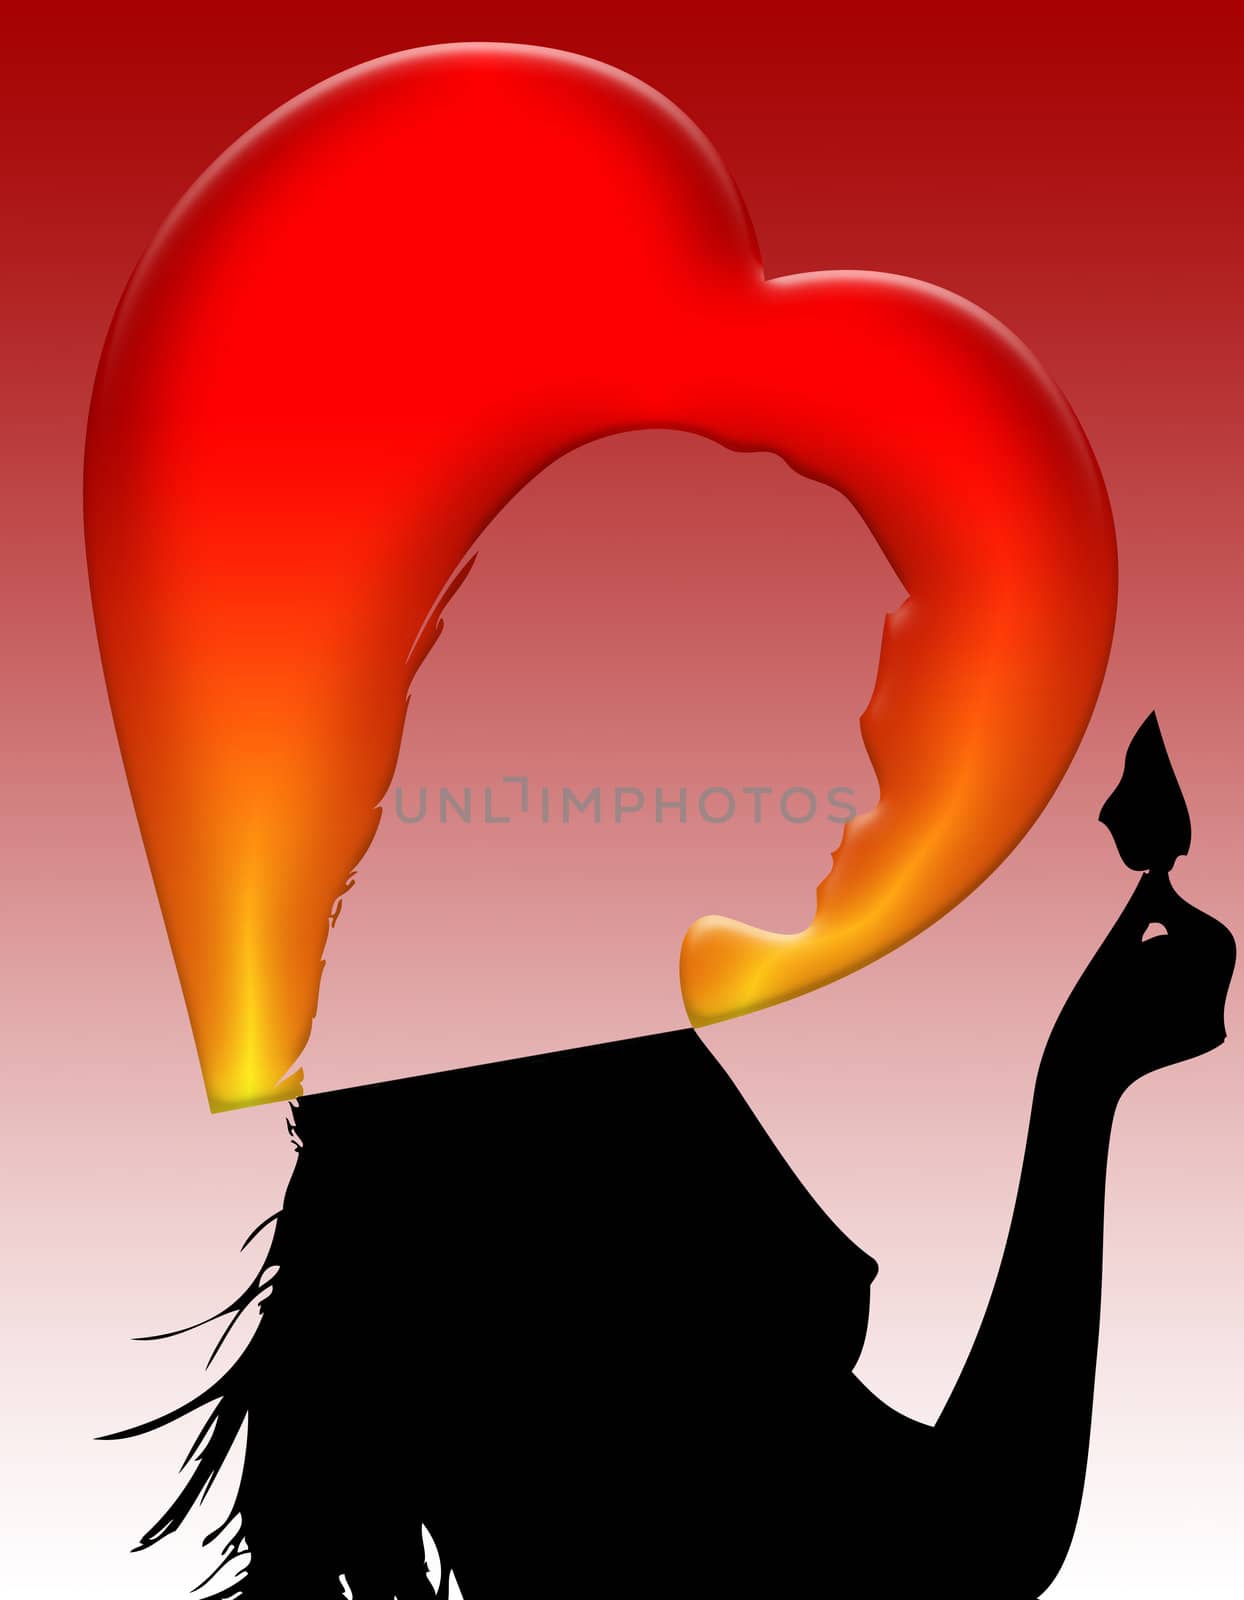 illustration or postcard with heart and silhouette of woman
